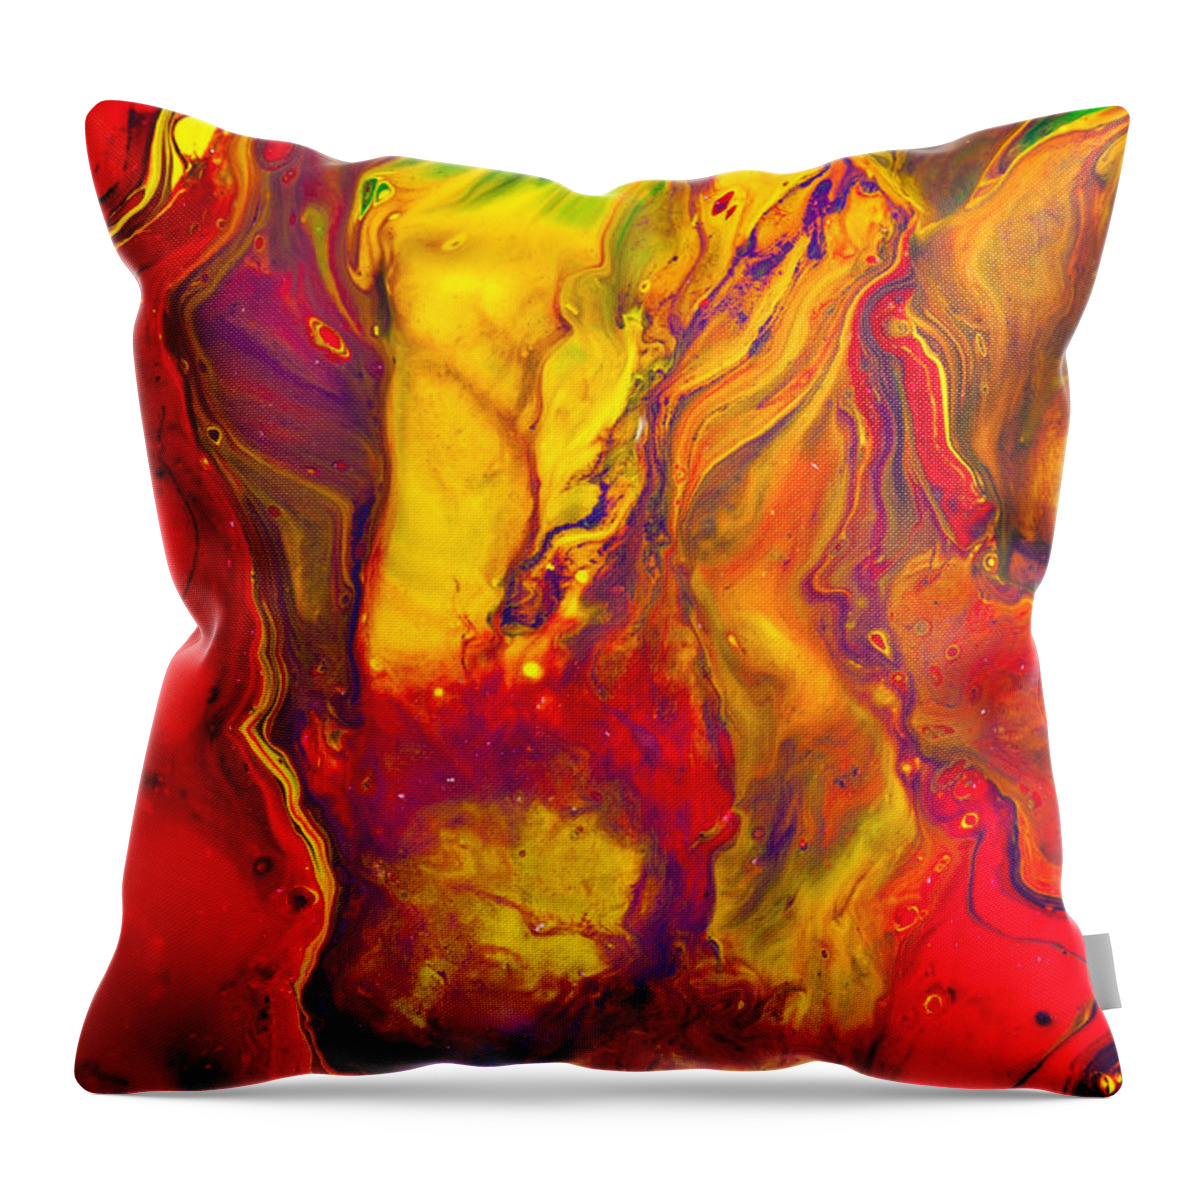 Abstract Throw Pillow featuring the digital art Zebra - Colorful Animal Art Painting by Modern Abstract